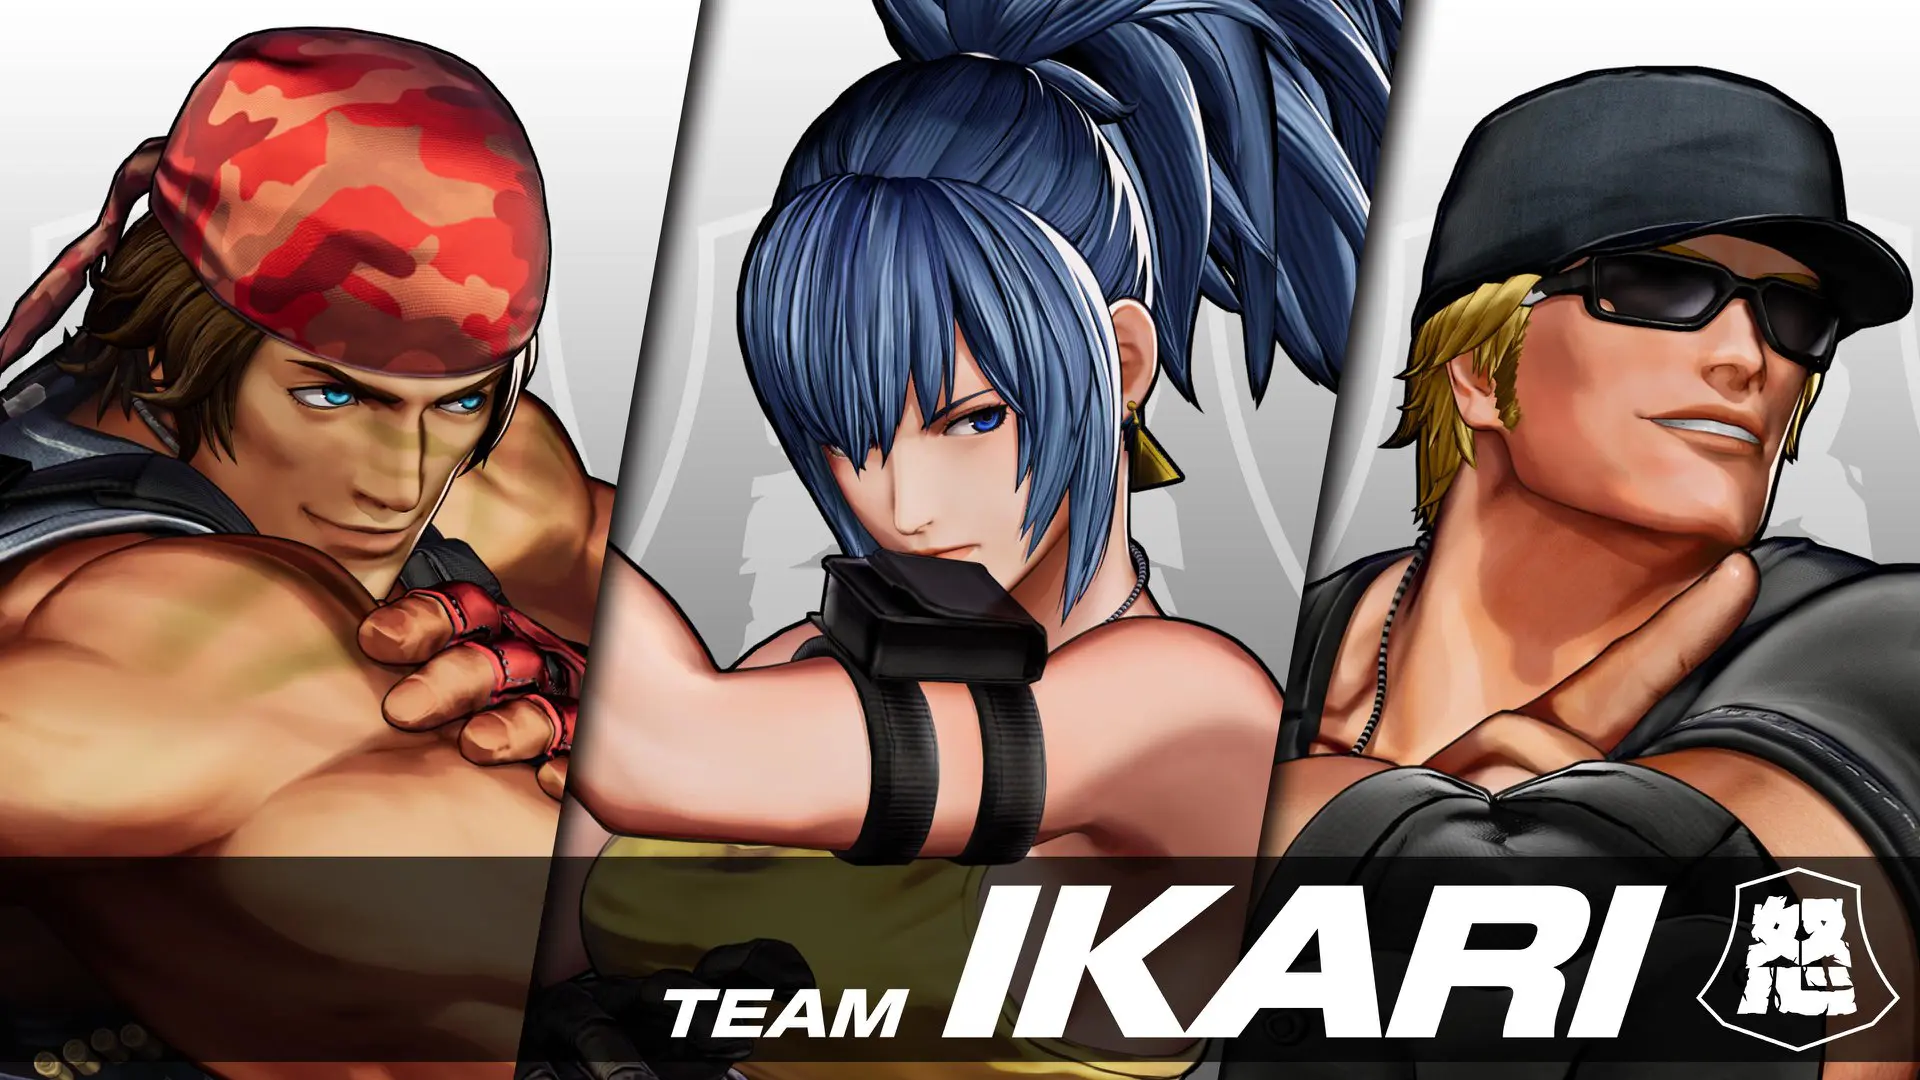 King of Fighters 15